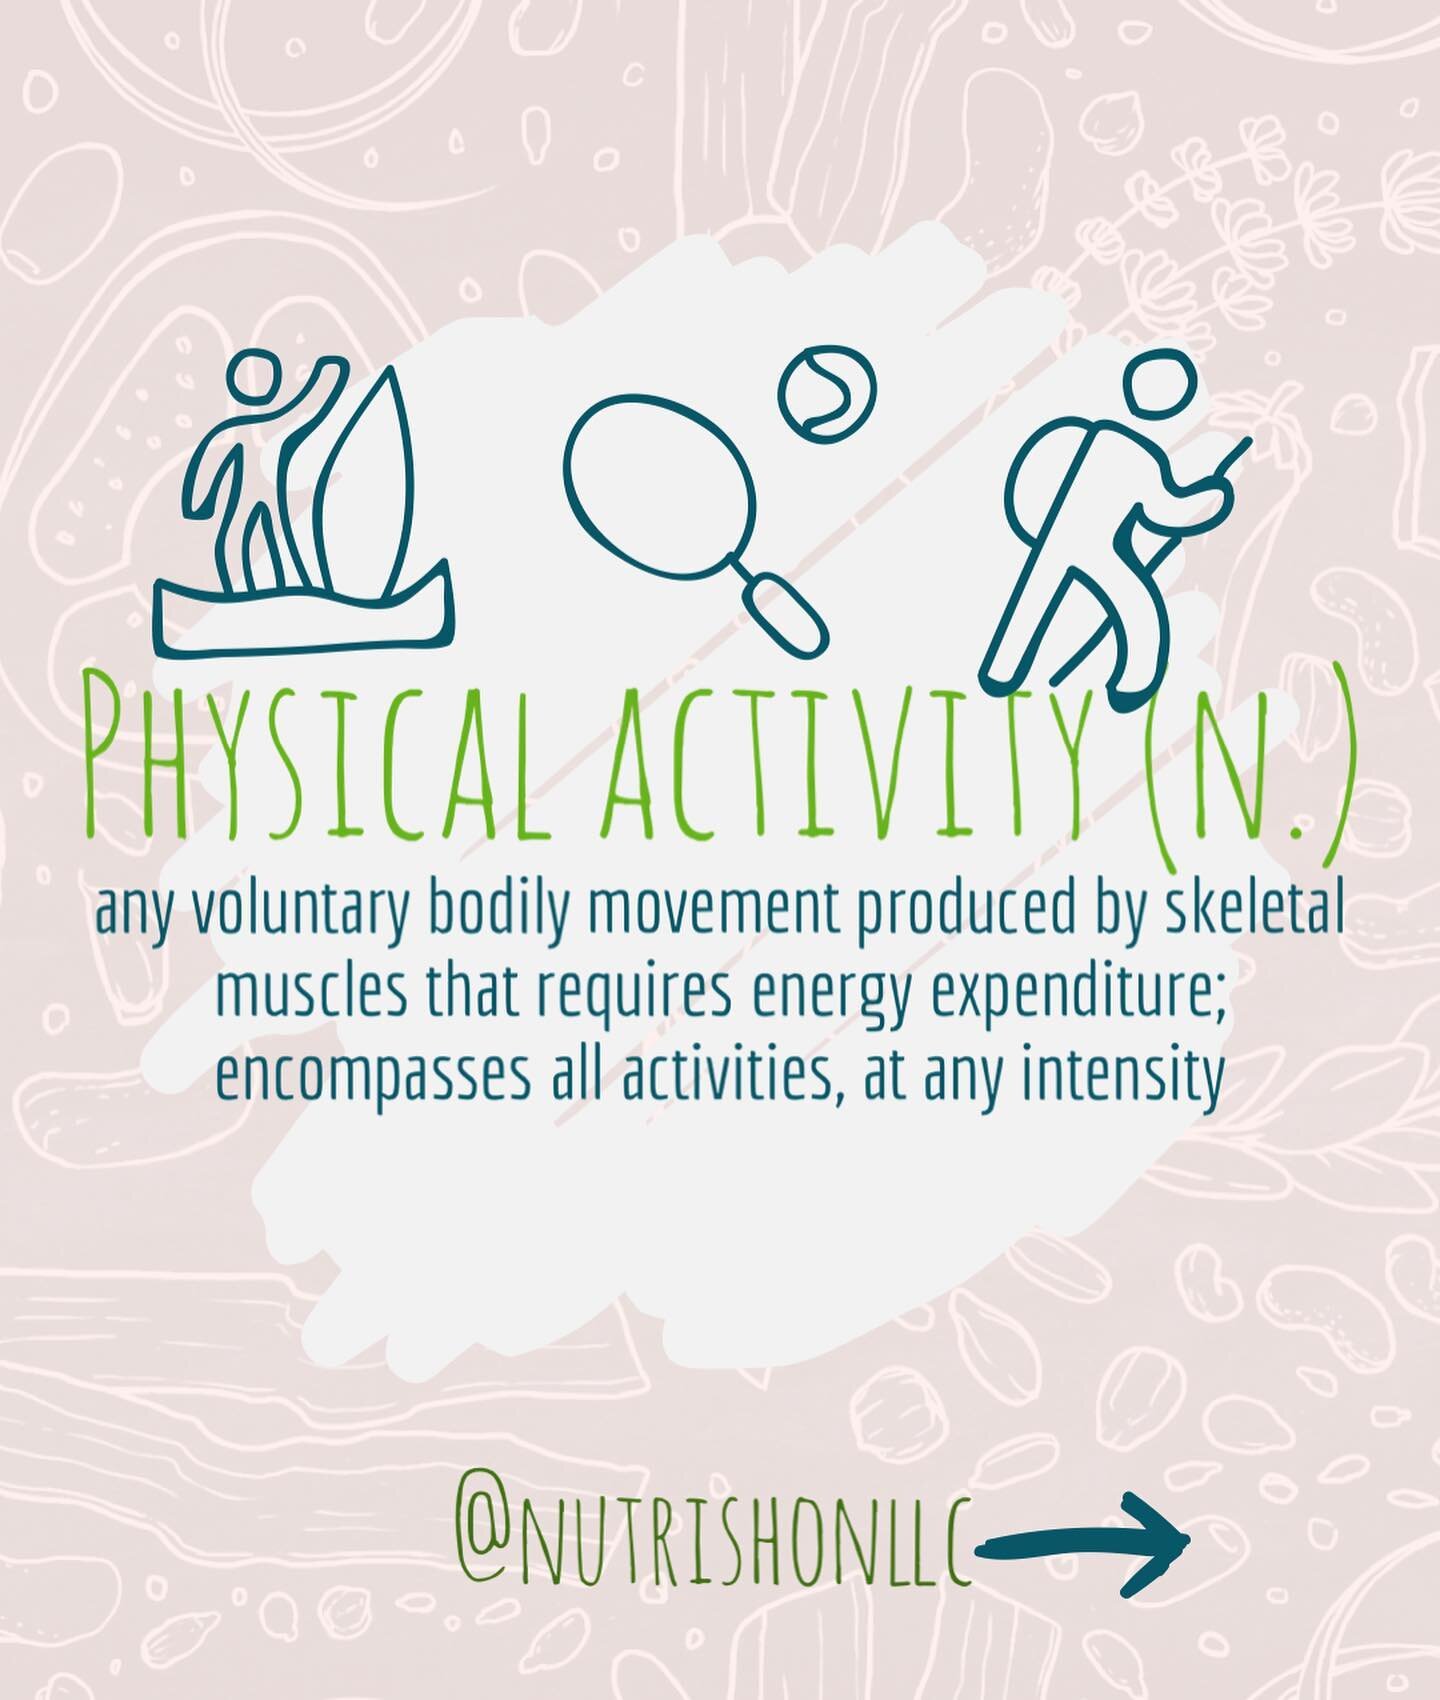 &hellip;in other words, both exercise and incidental activity are a part of physical activity. 

The only thing that makes exercise and working out different is they are physical activity with intention and structure.

The upside of that means that e